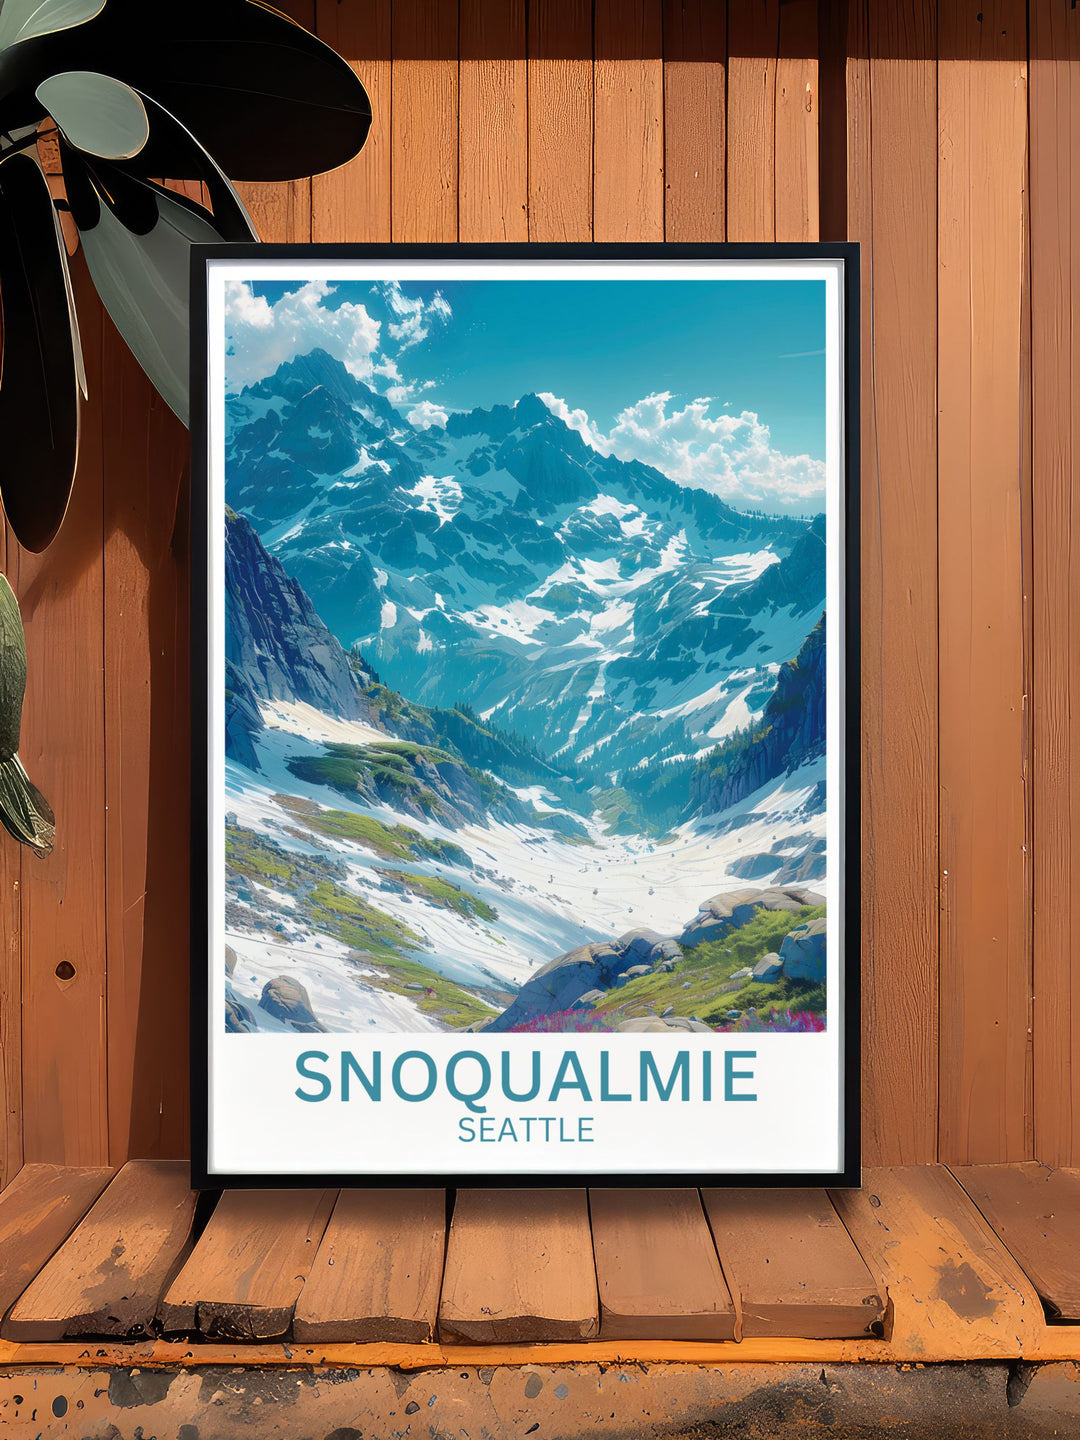 Delight in the thrill of The Summit at Snoqualmie with this art print, capturing the vibrant resort atmosphere and historical significance.